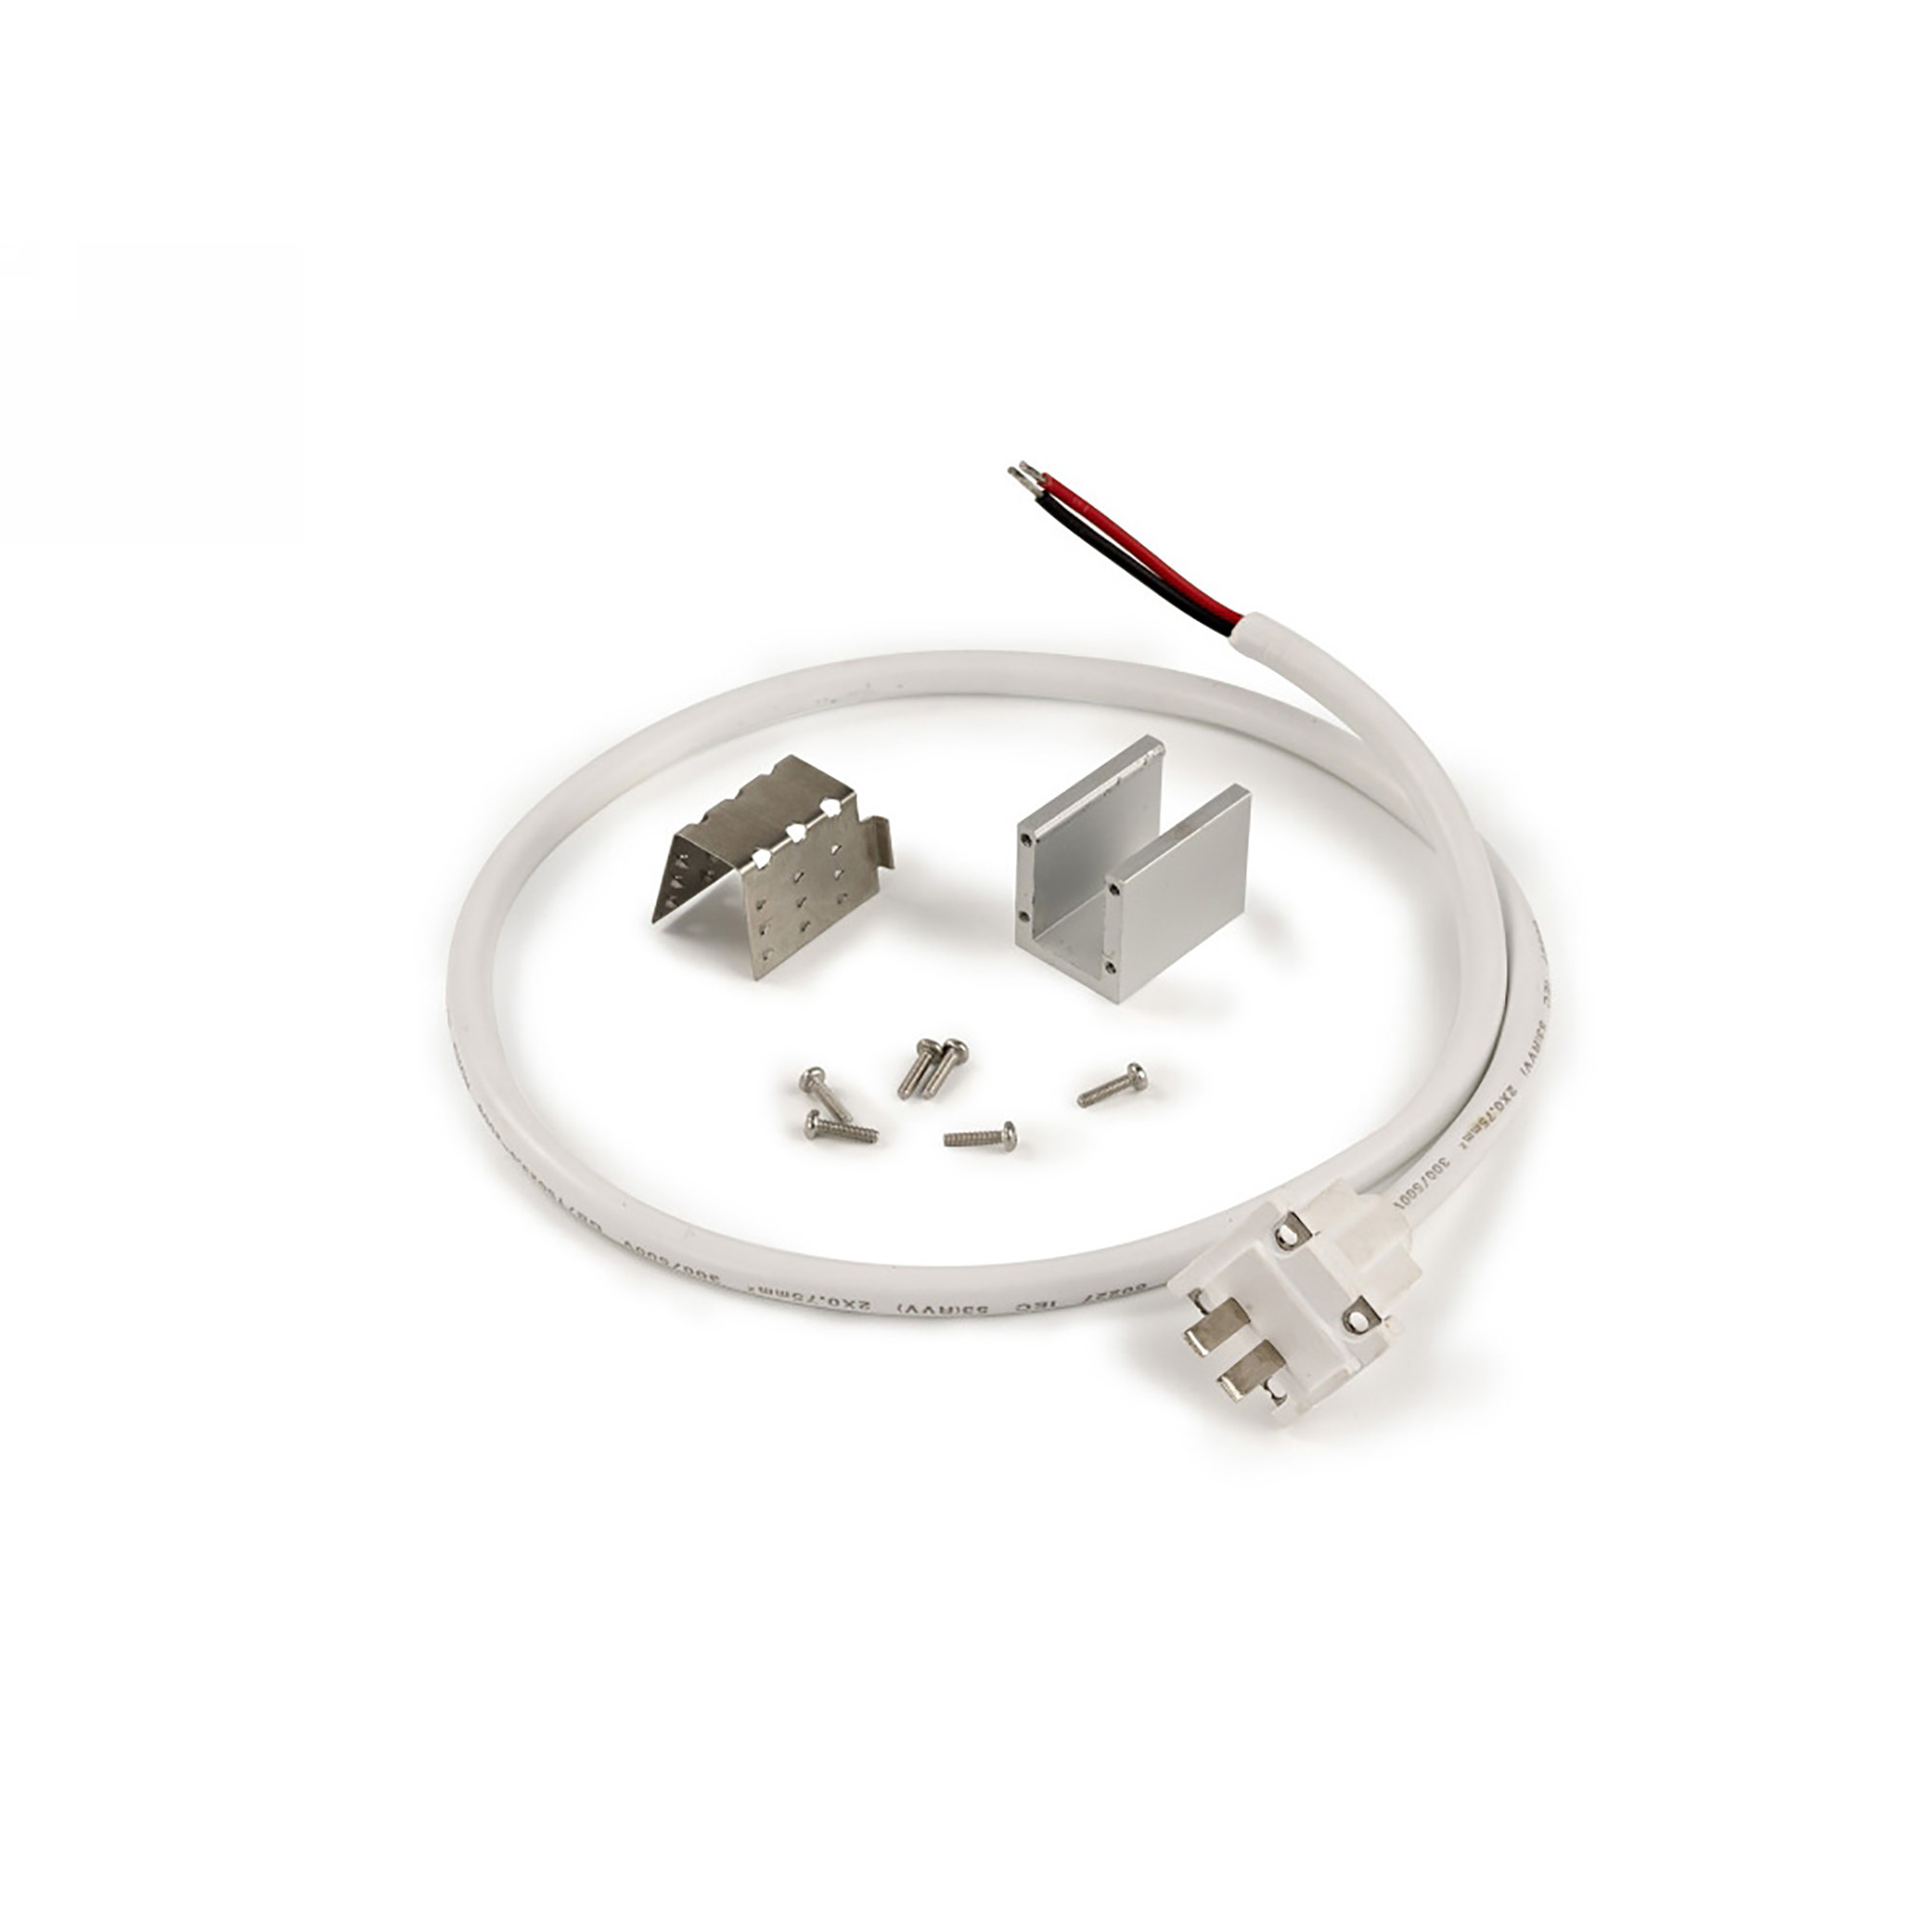 DX770043  Nexi 60 SF/SR, Front Left Side Connection Kit 0.6m Cable IP67/68